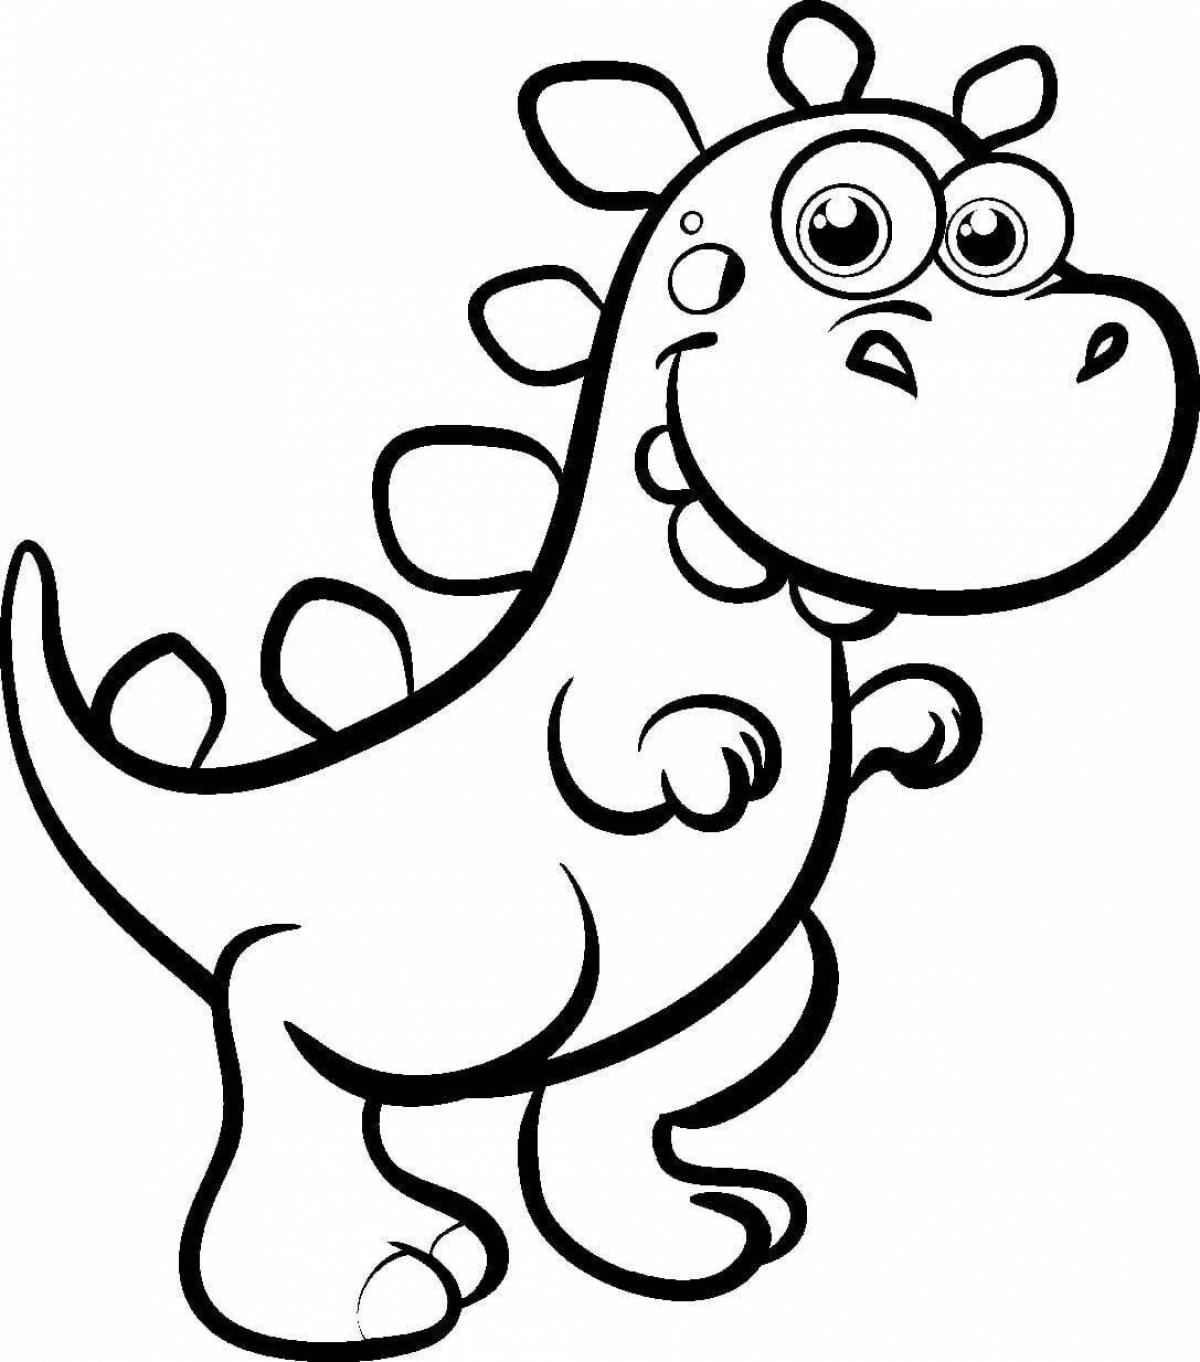 Coloring pages with playful dinosaurs for children 5 years old